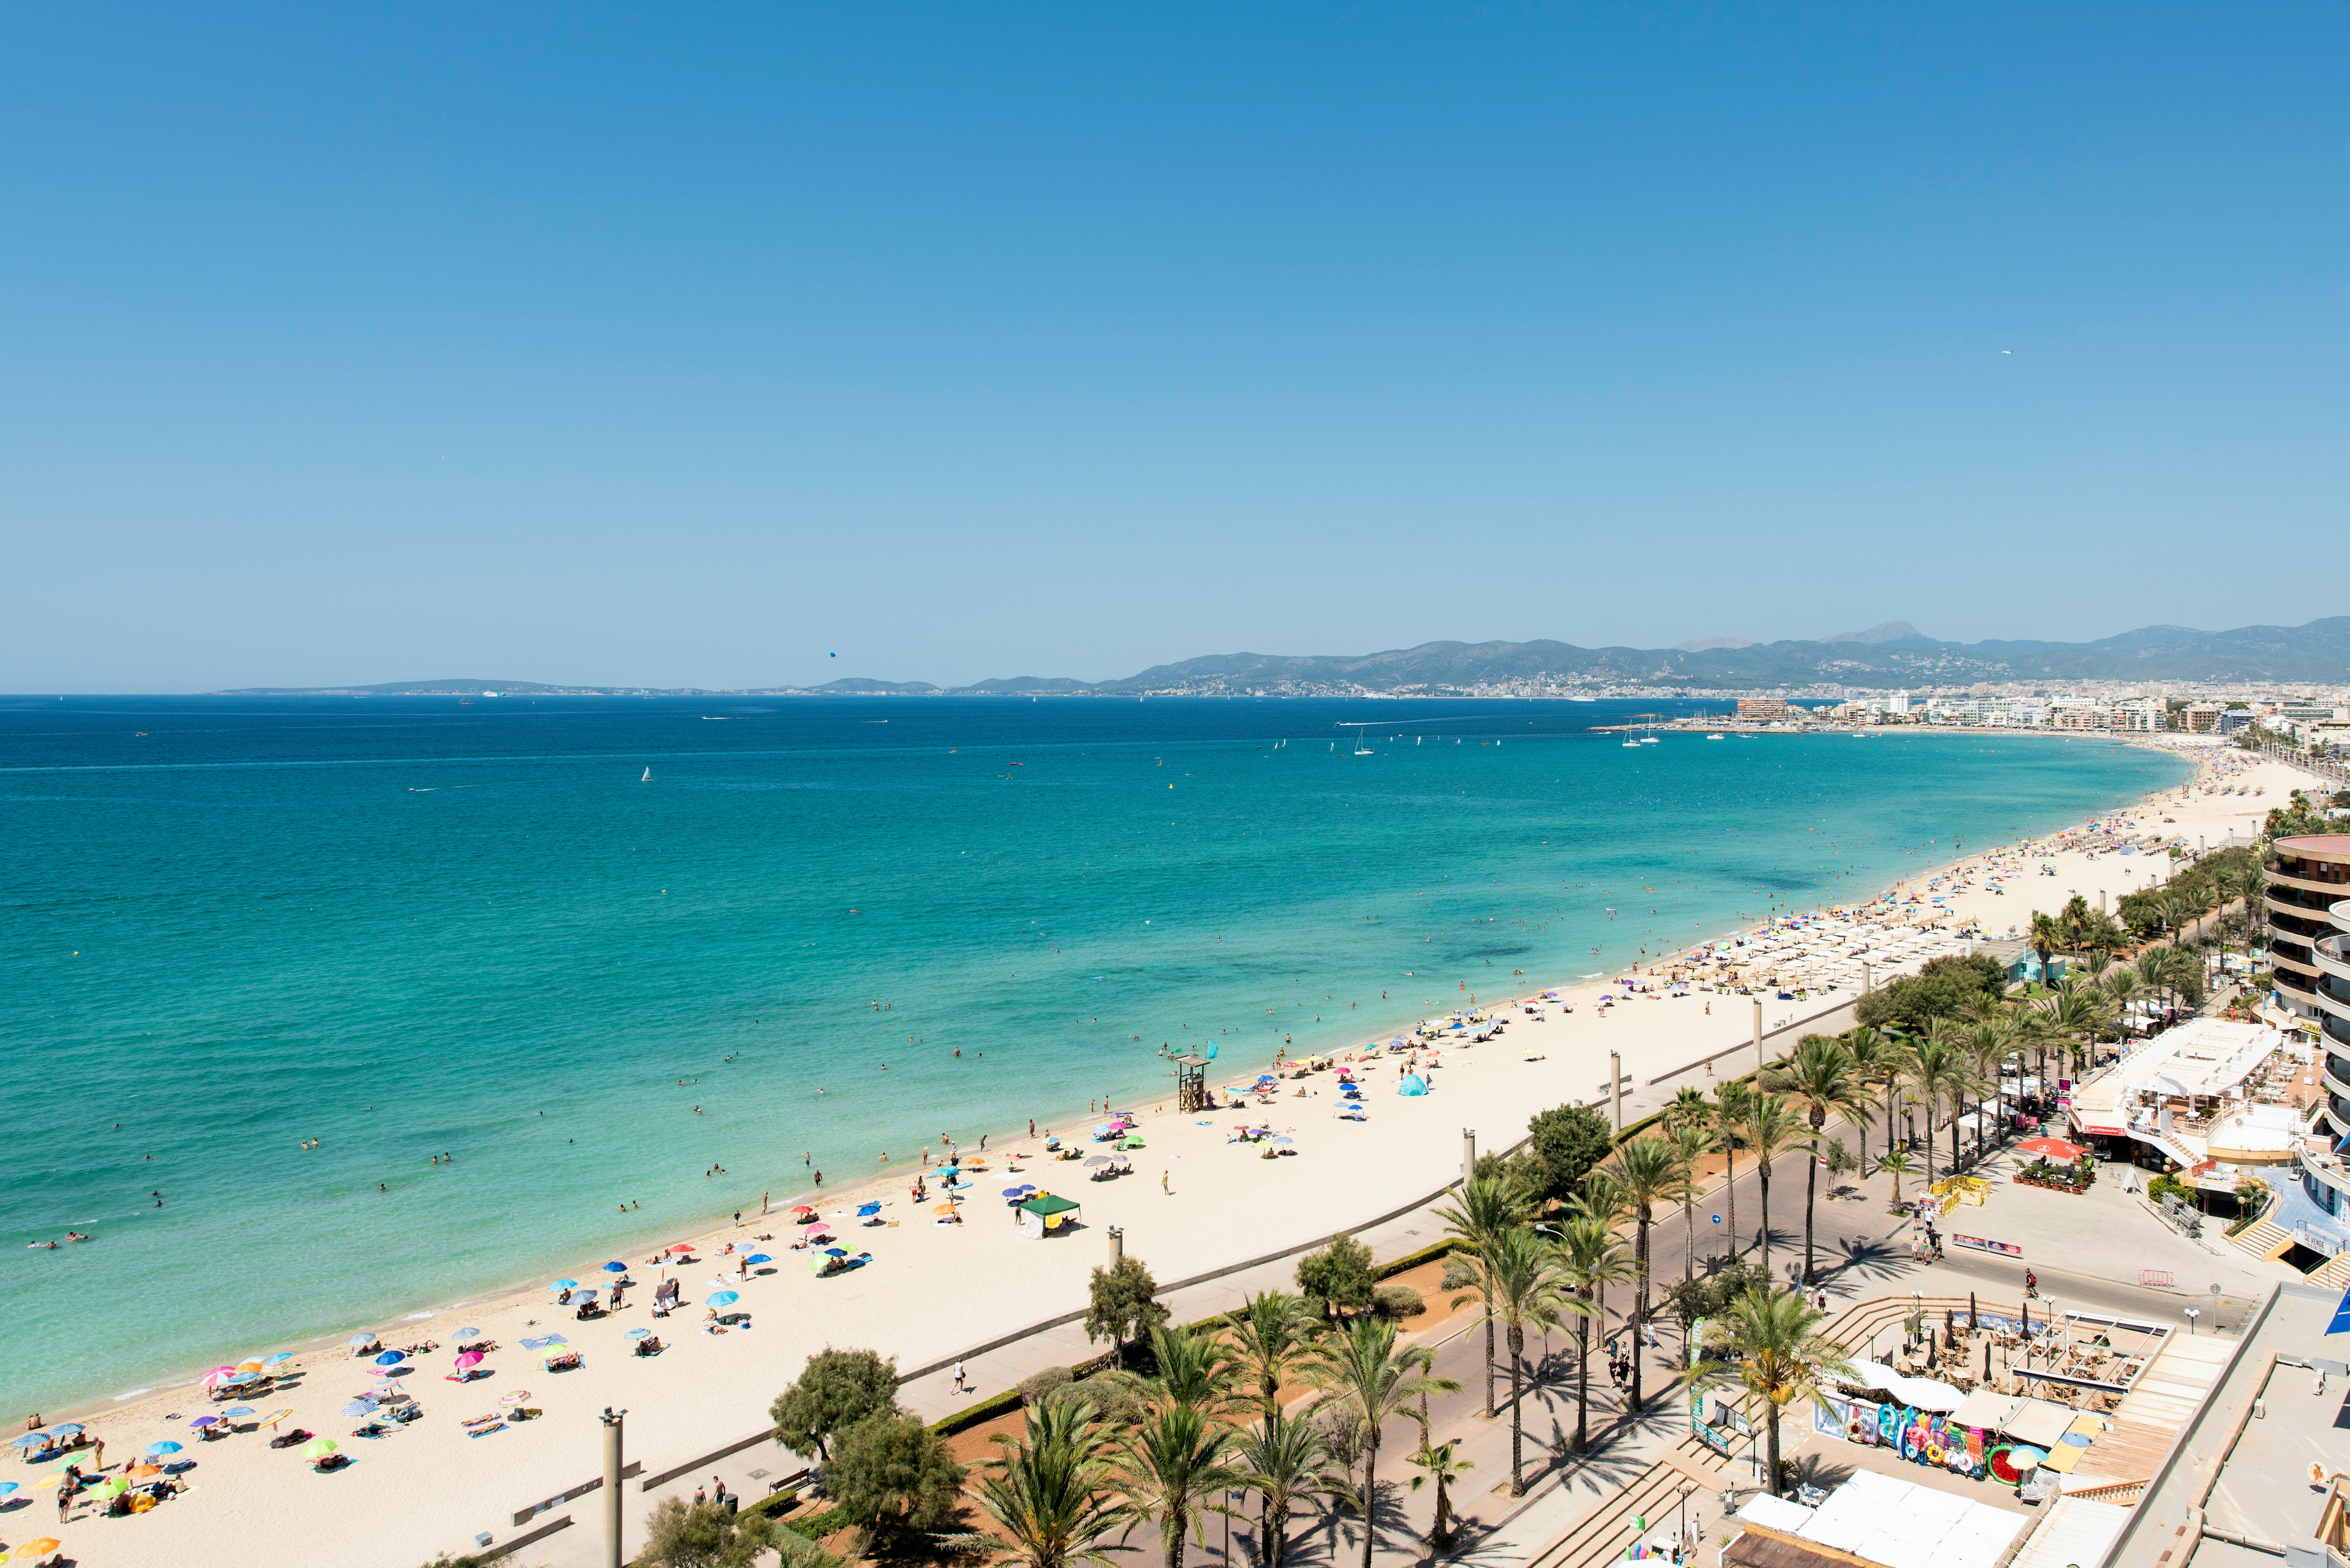 What is the ideal month for beach activities in Mallorca?